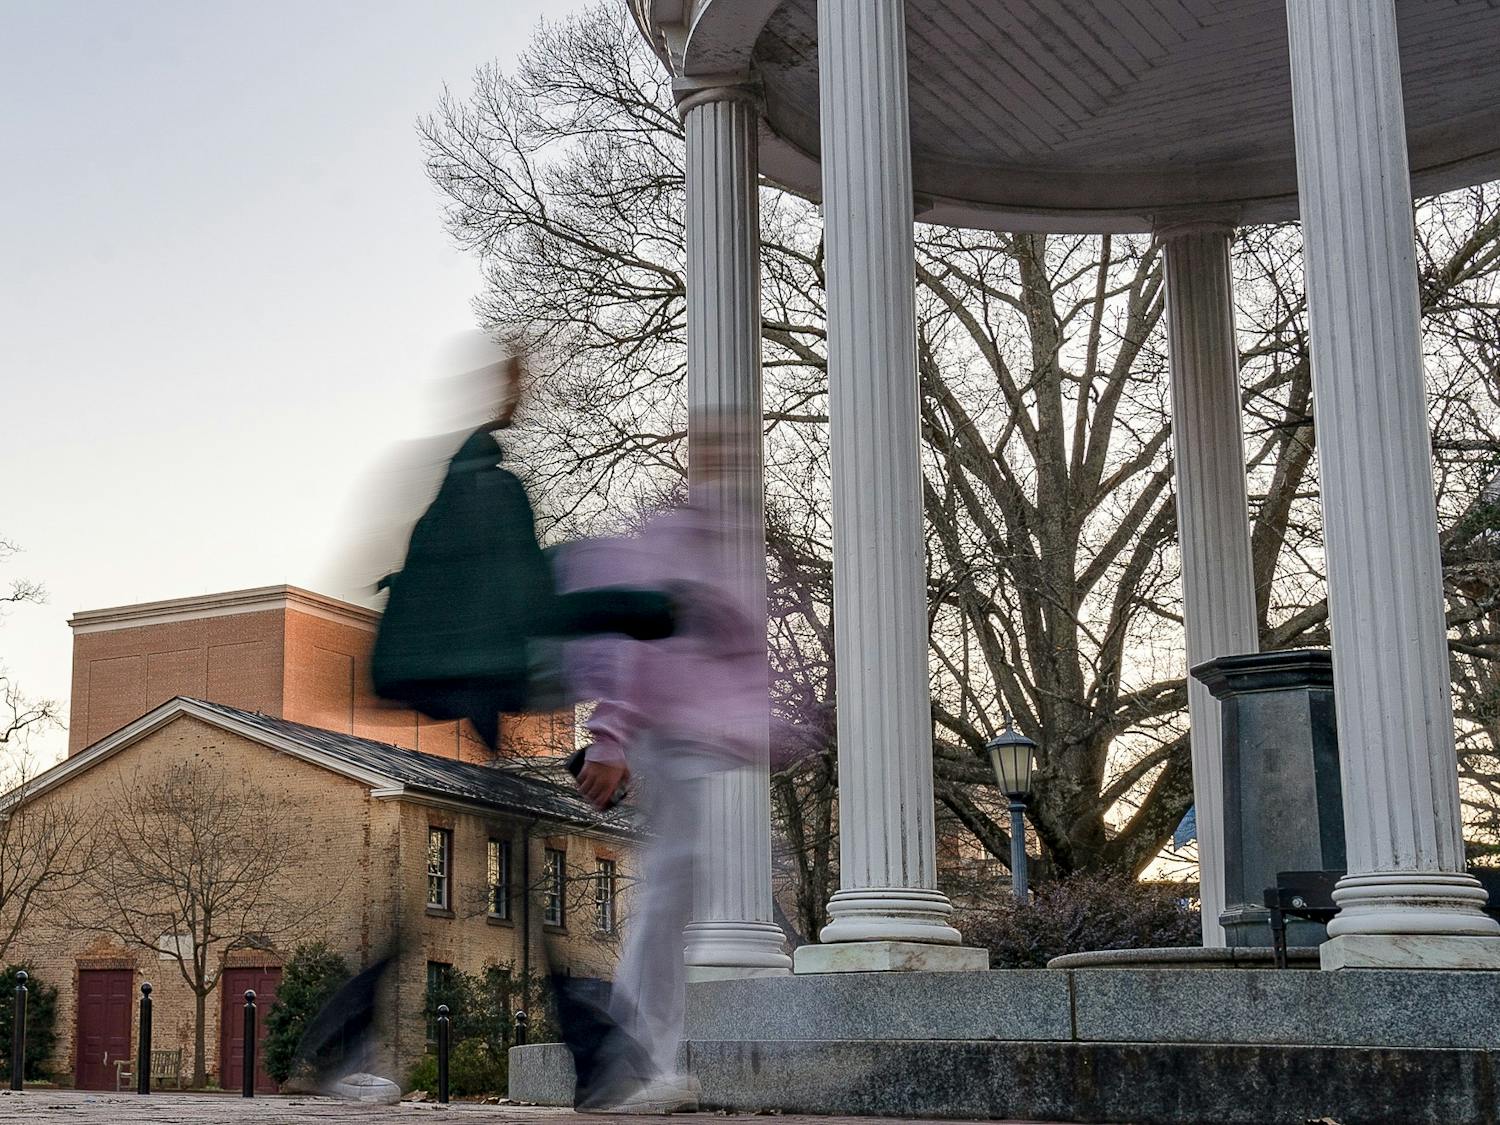 Students walk by the Old Well on Monday, Feb. 6, 2023.